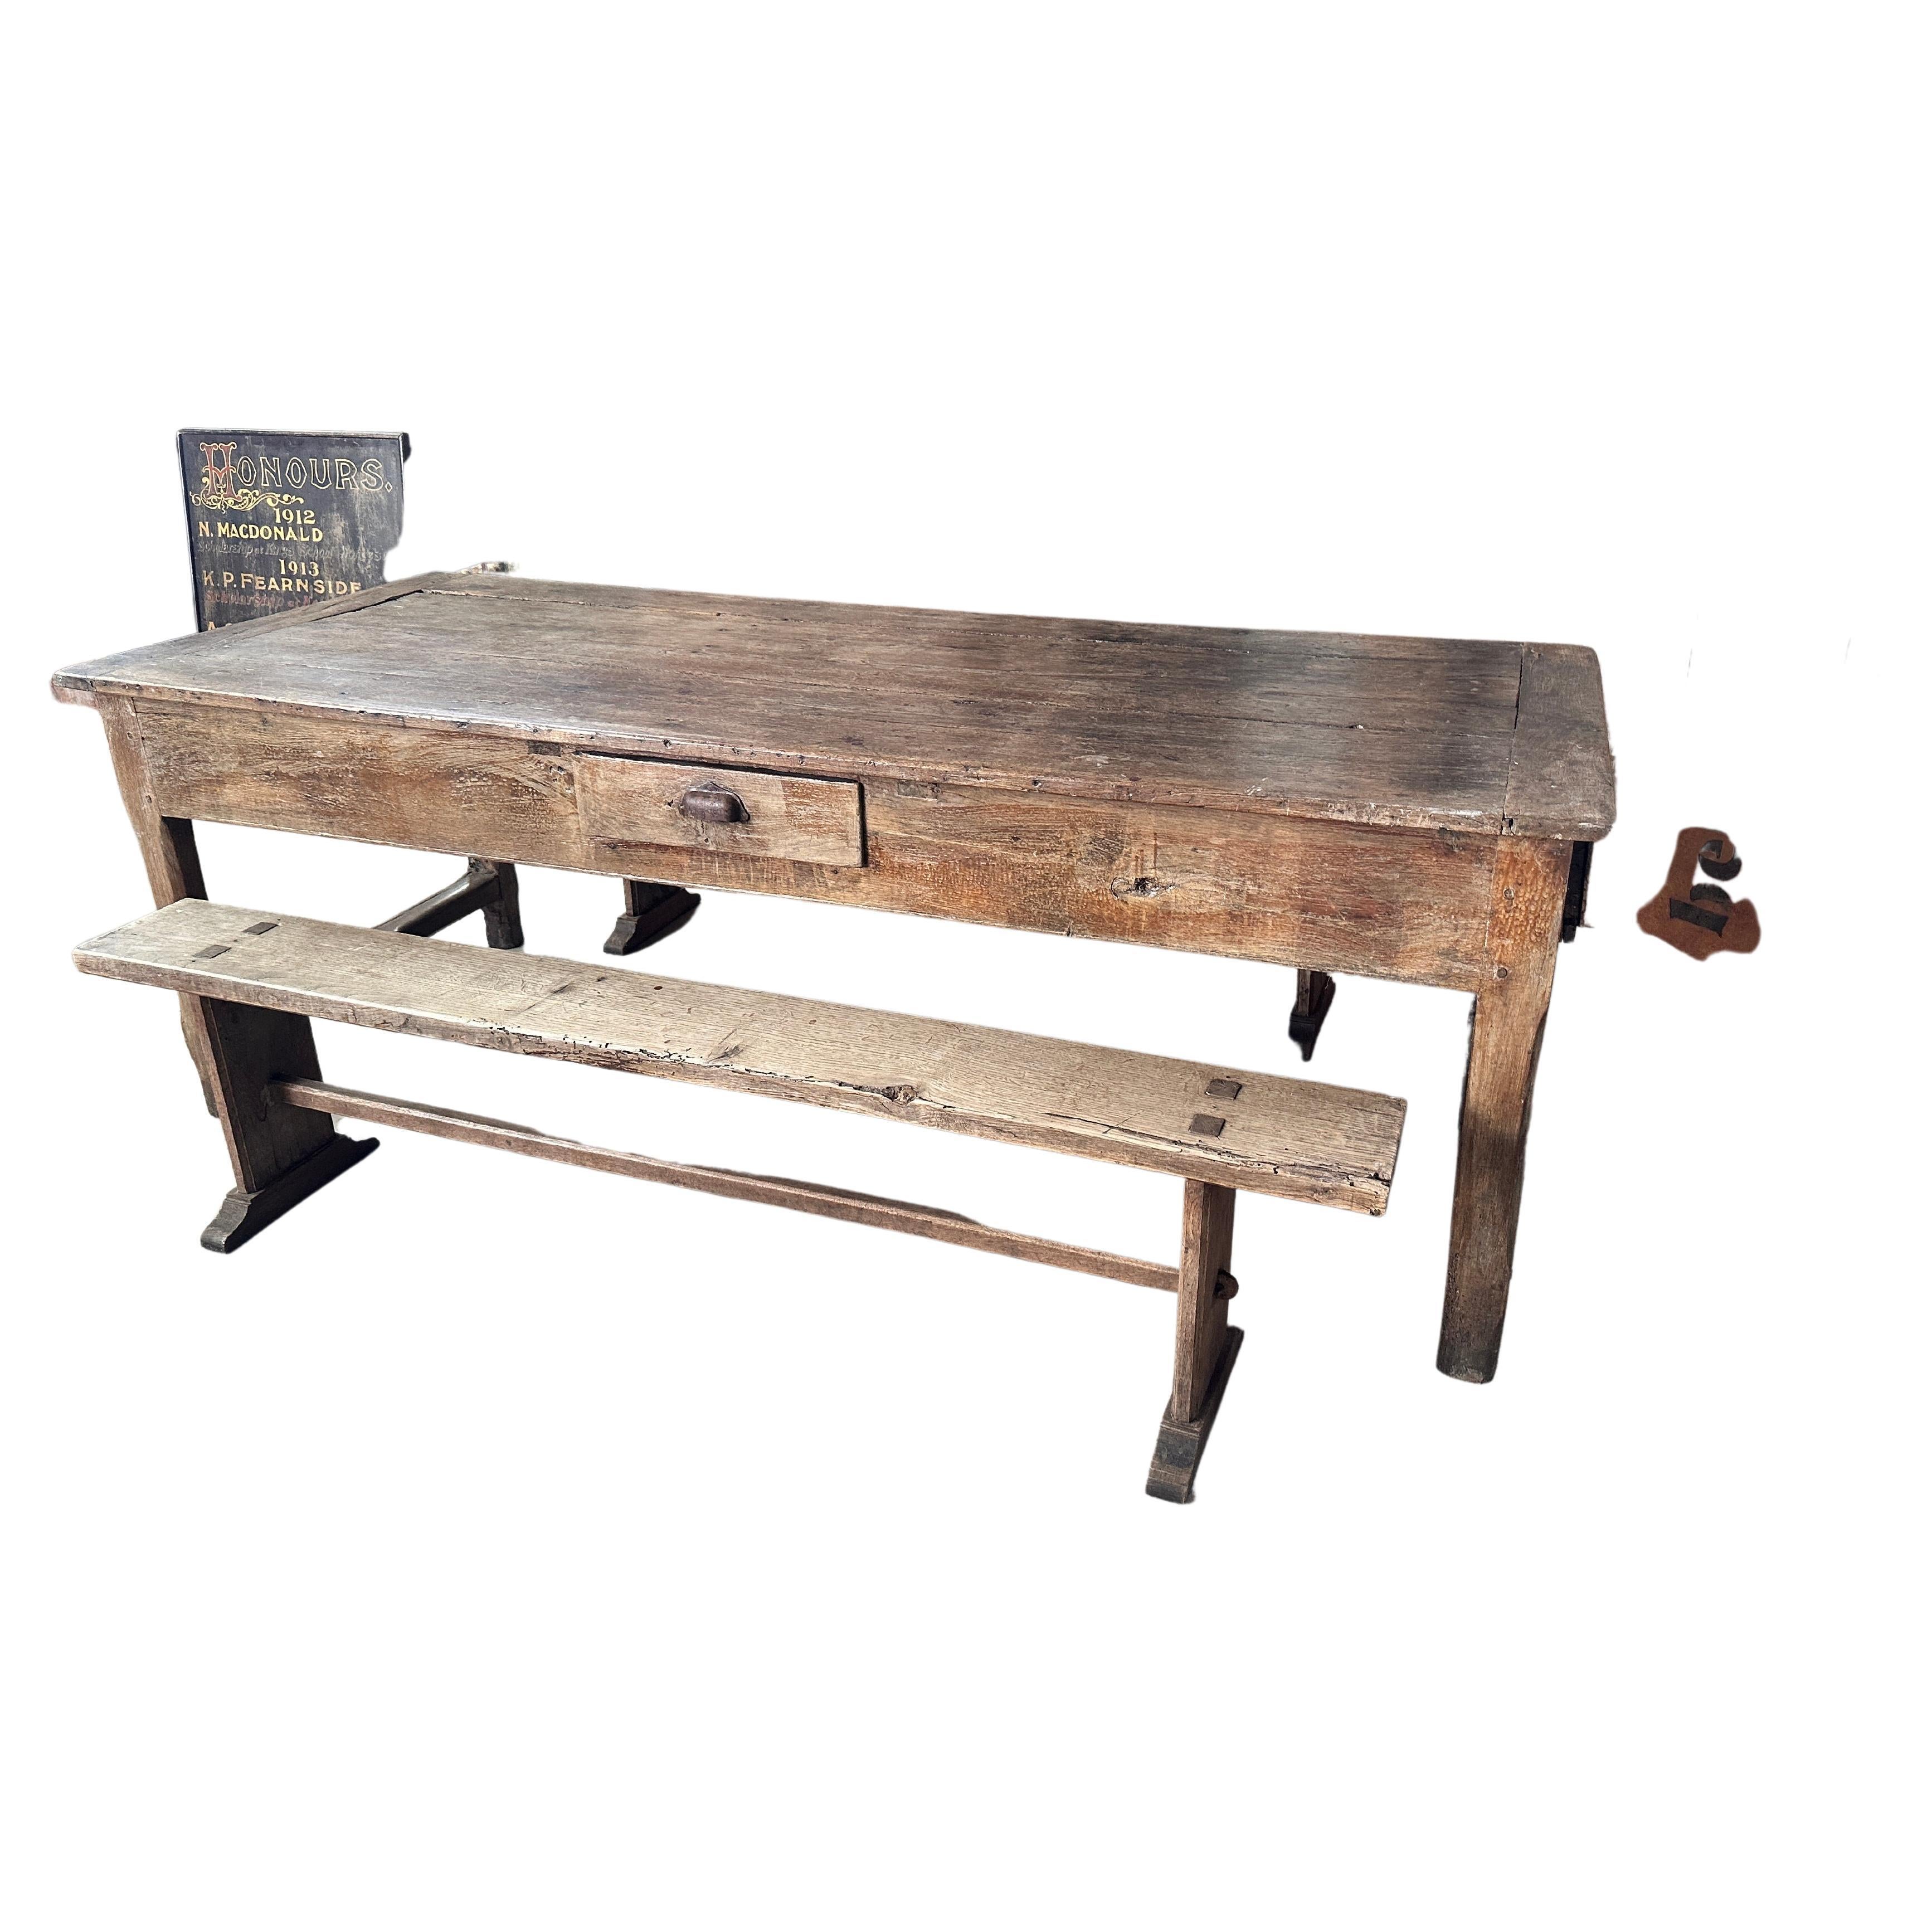 Antique French Chestnut Farmhouse Dordogne Refectory Dining Table and Benches For Sale